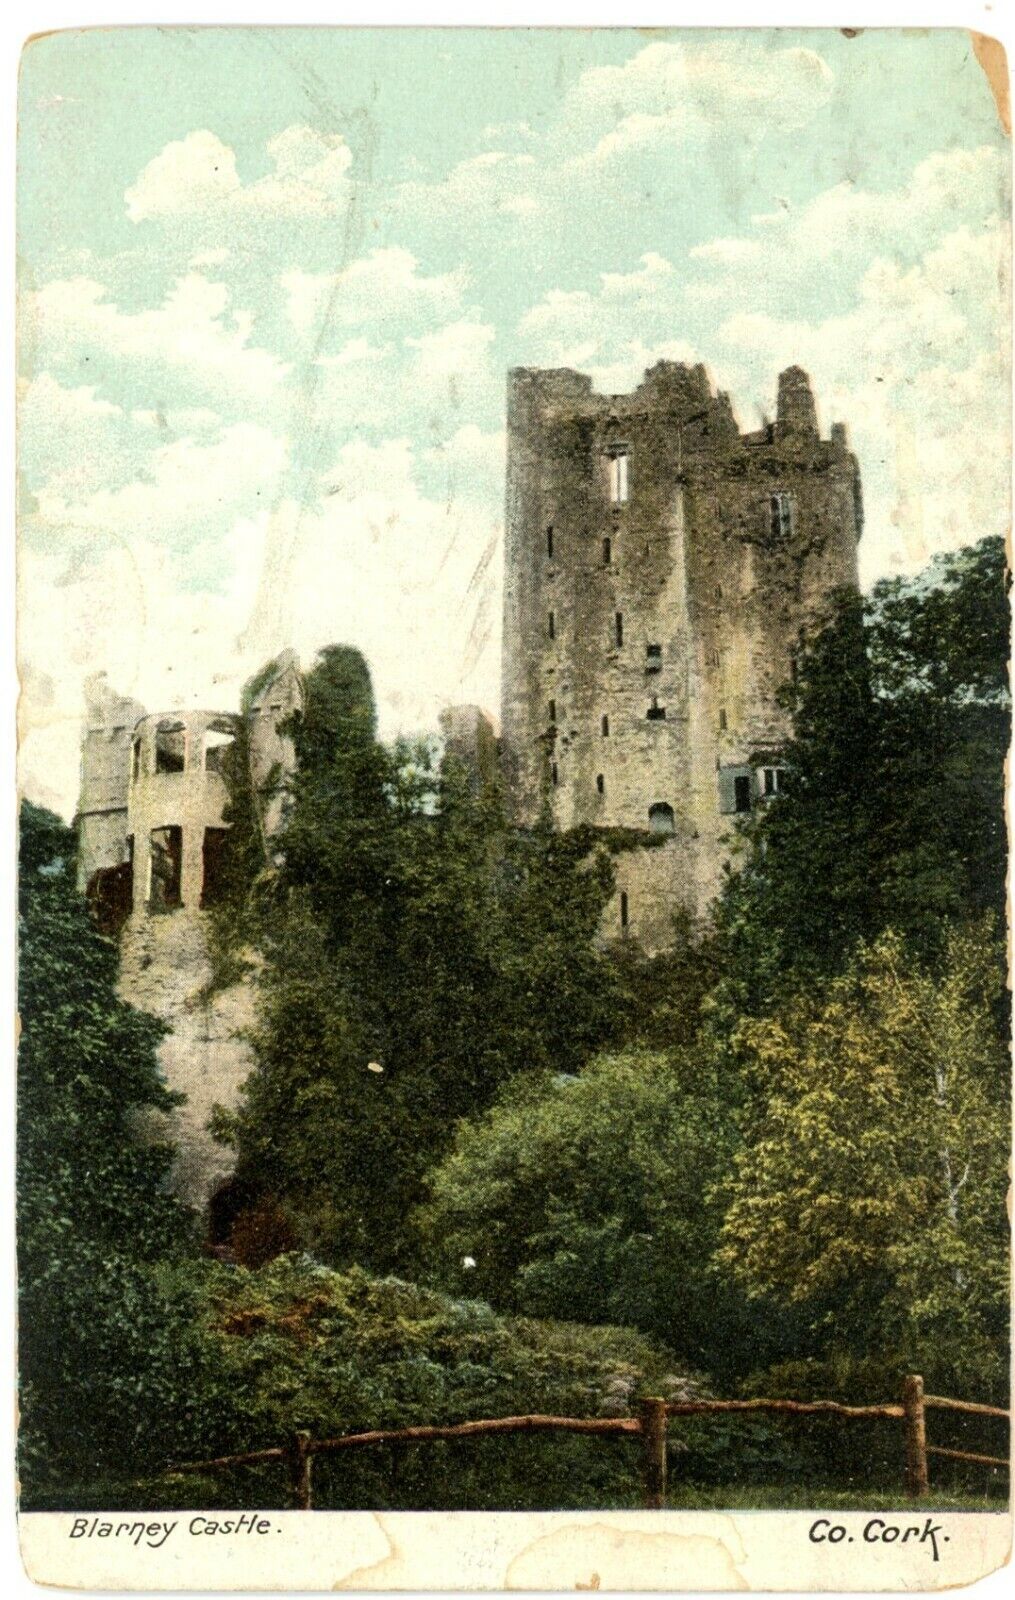 View Of The Forts Of Blarney Castle In Co Cork, Ireland Postcard